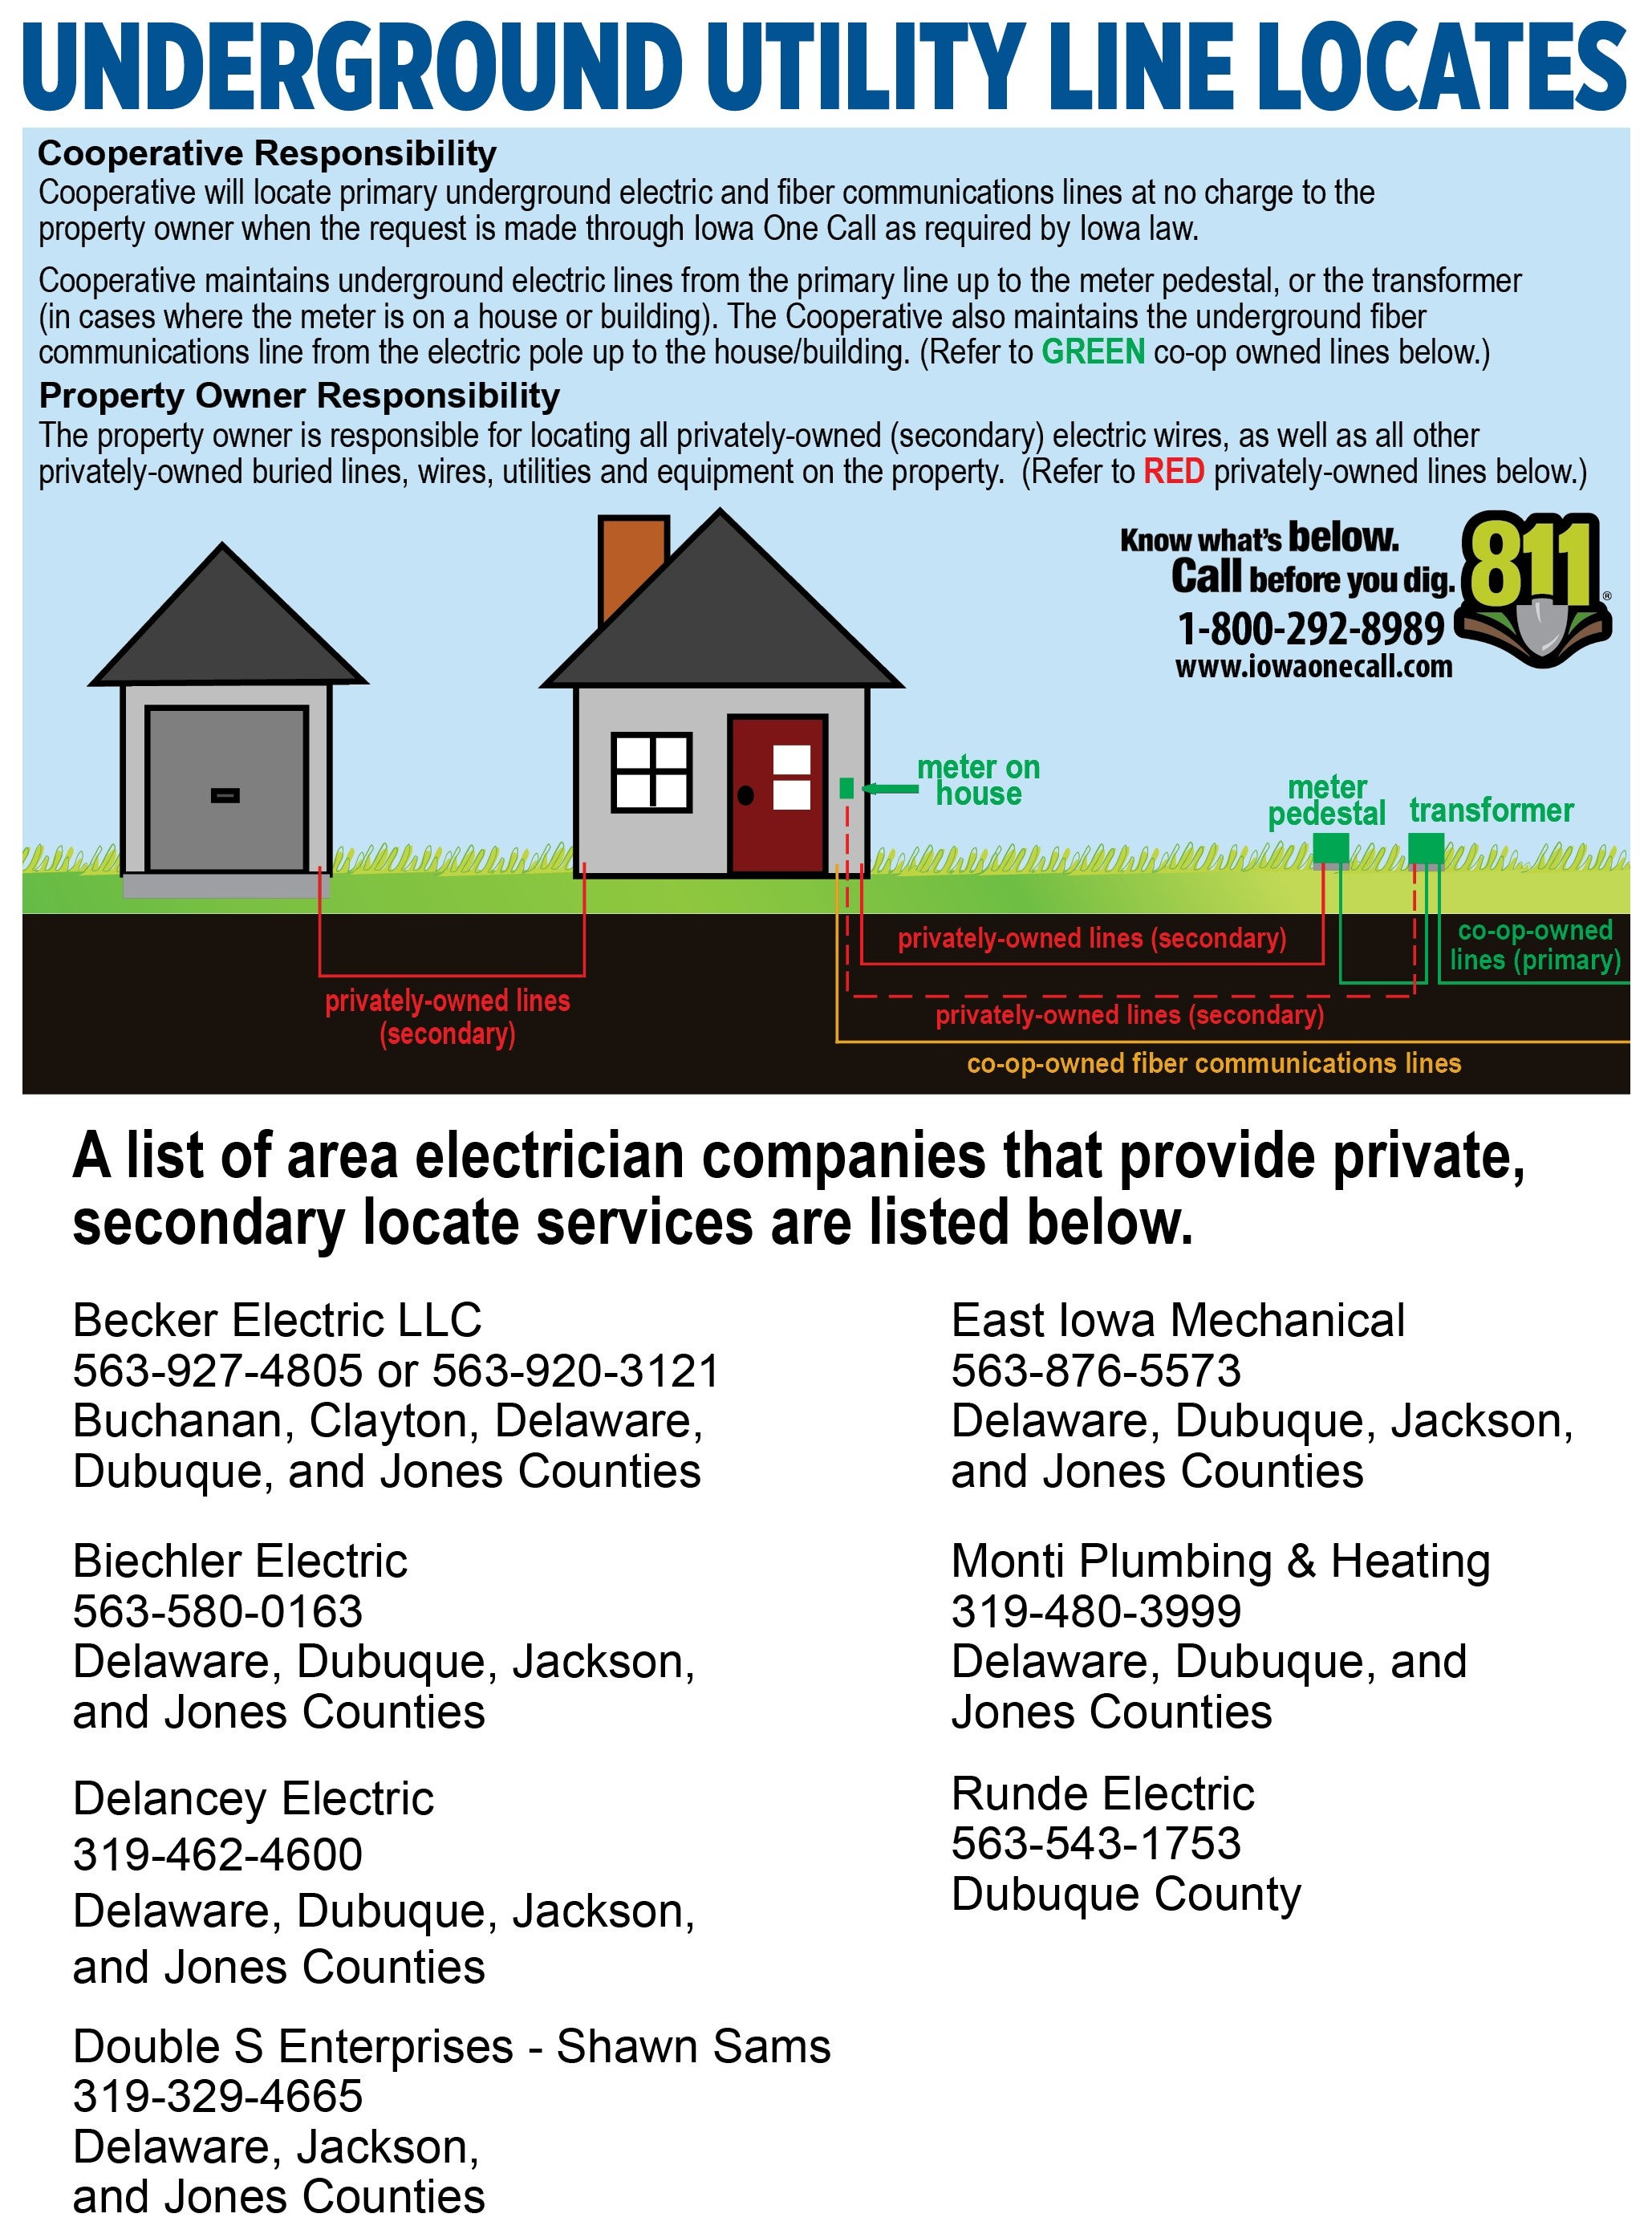 call-before-you-dig-maquoketa-valley-electric-cooperative